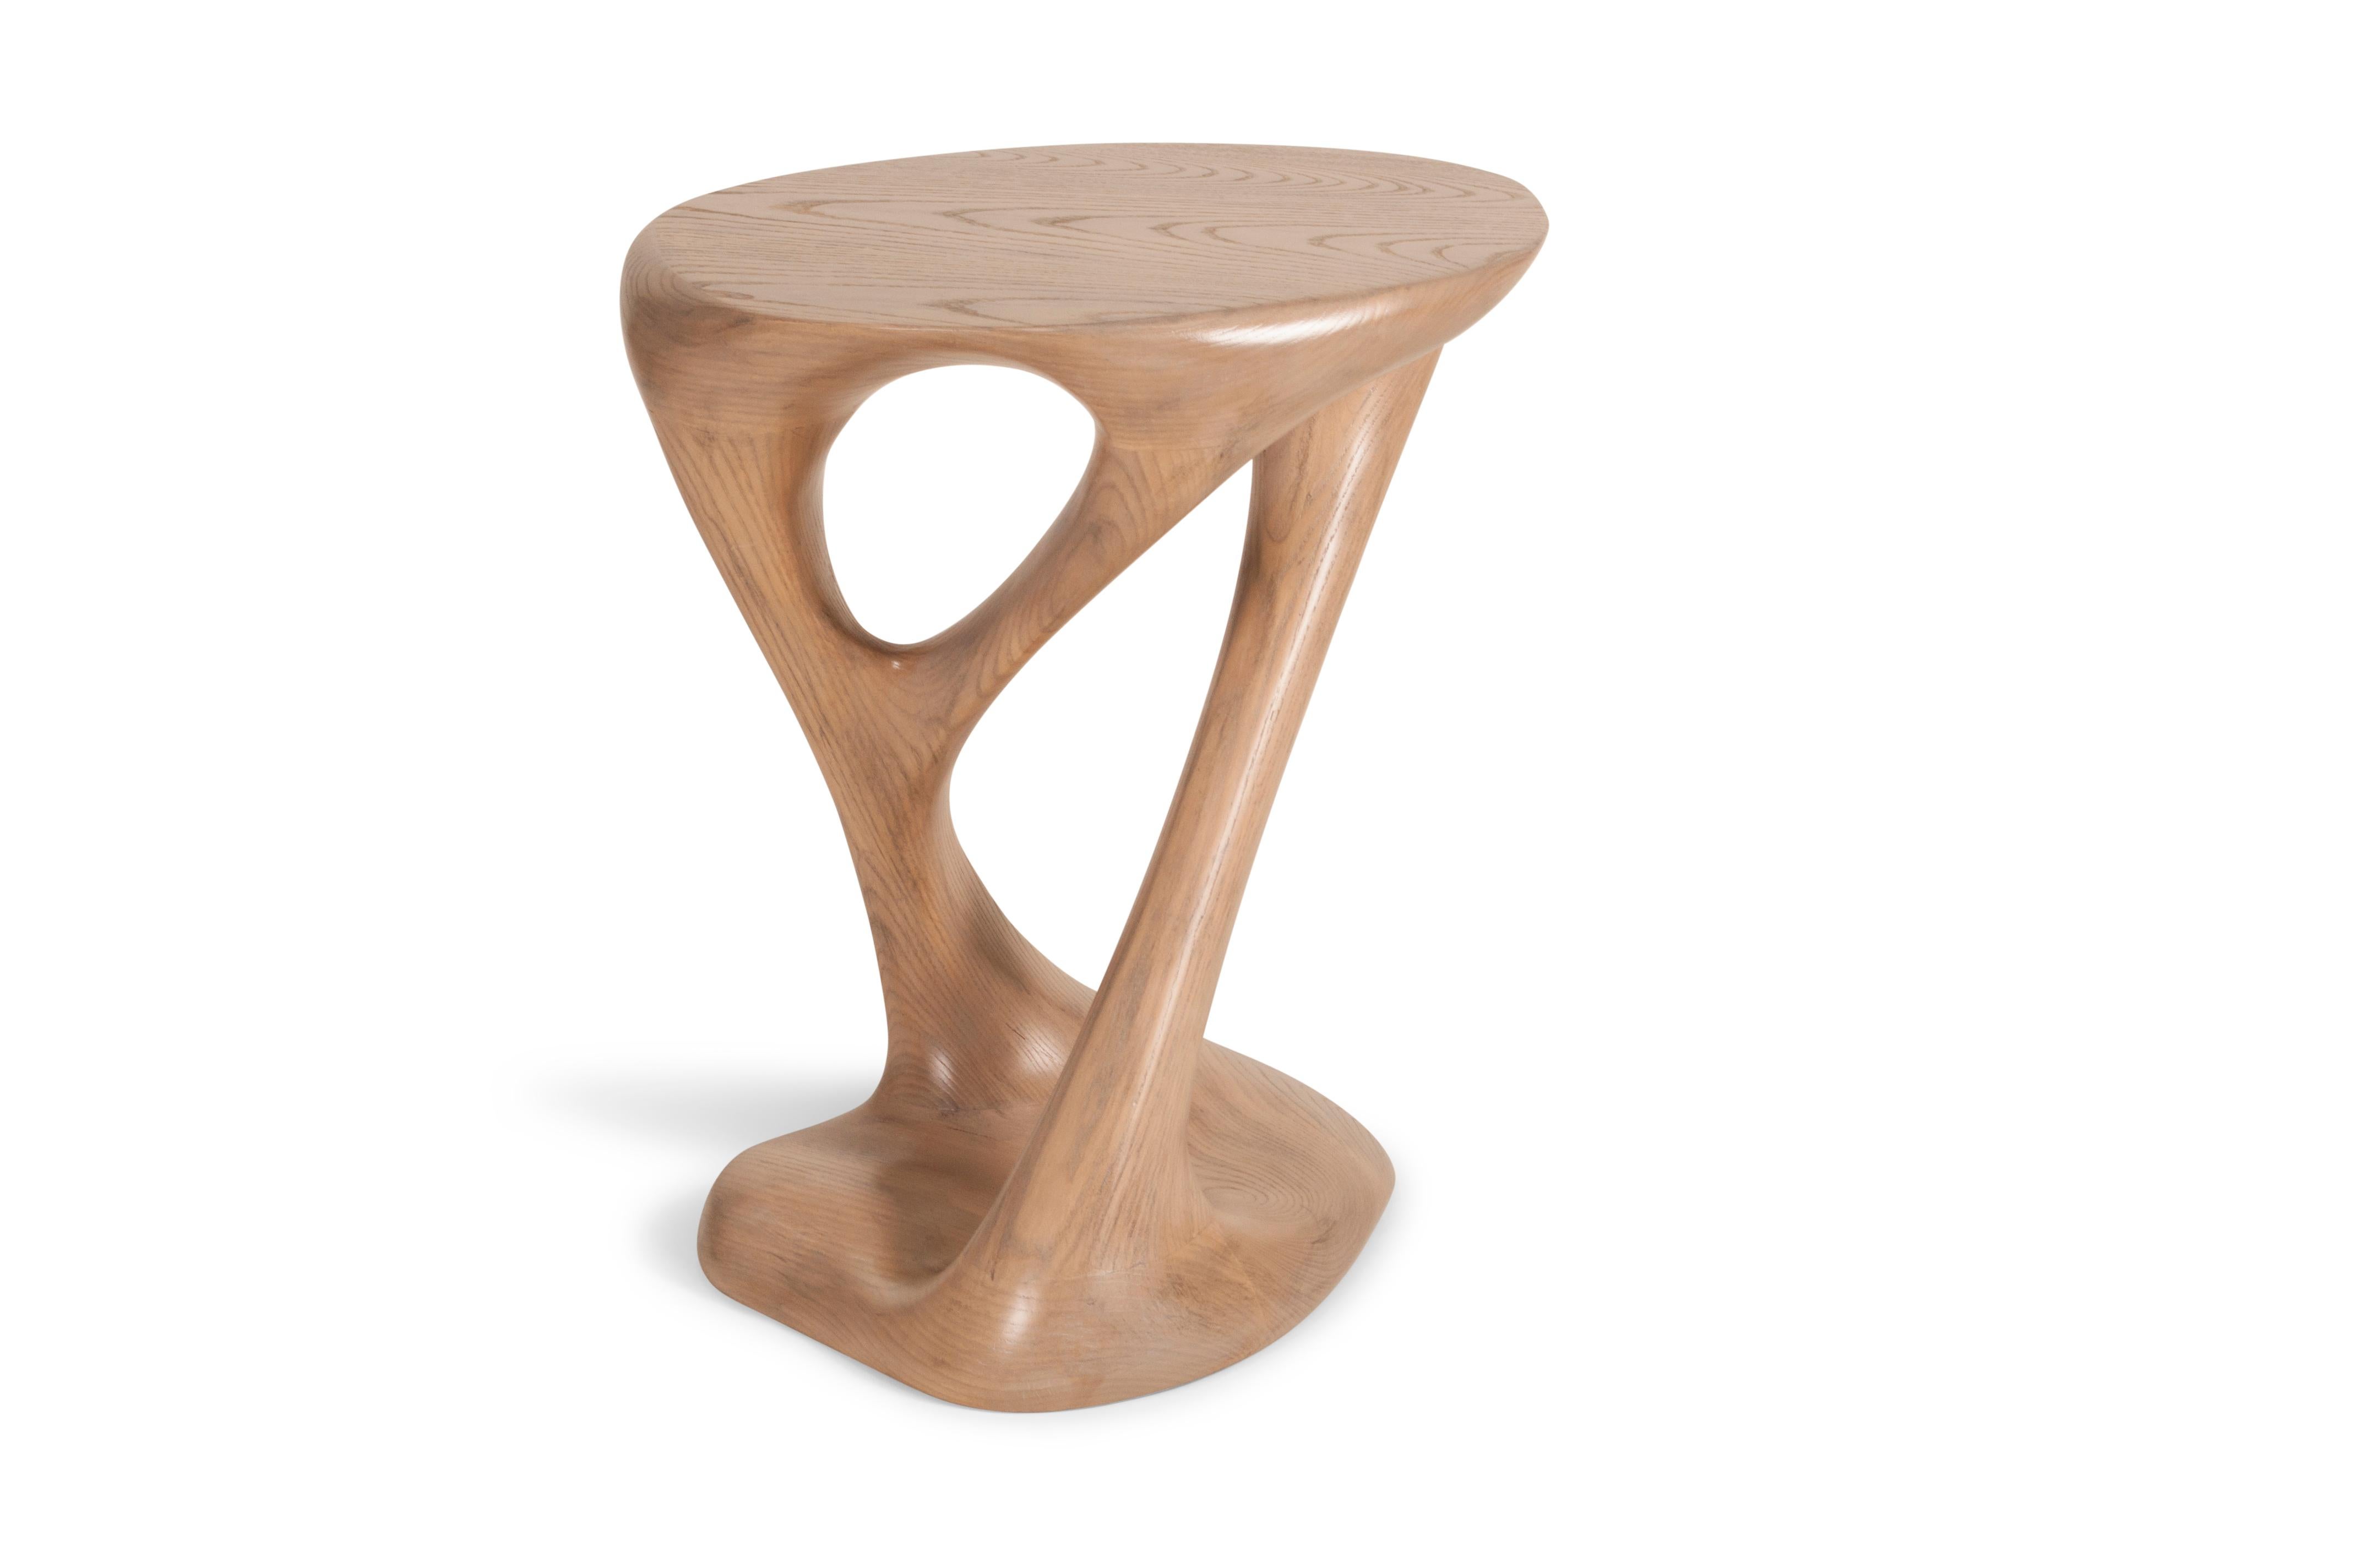 Amorph Sasha side table is made from solid ashwood and finished antique oak.
Dimensions: 20” W, 20” D, 23” H.
About Amorph: 
Amorph is a design and manufacturing company based in Los Angeles, California. We take pride in hand crafted designs